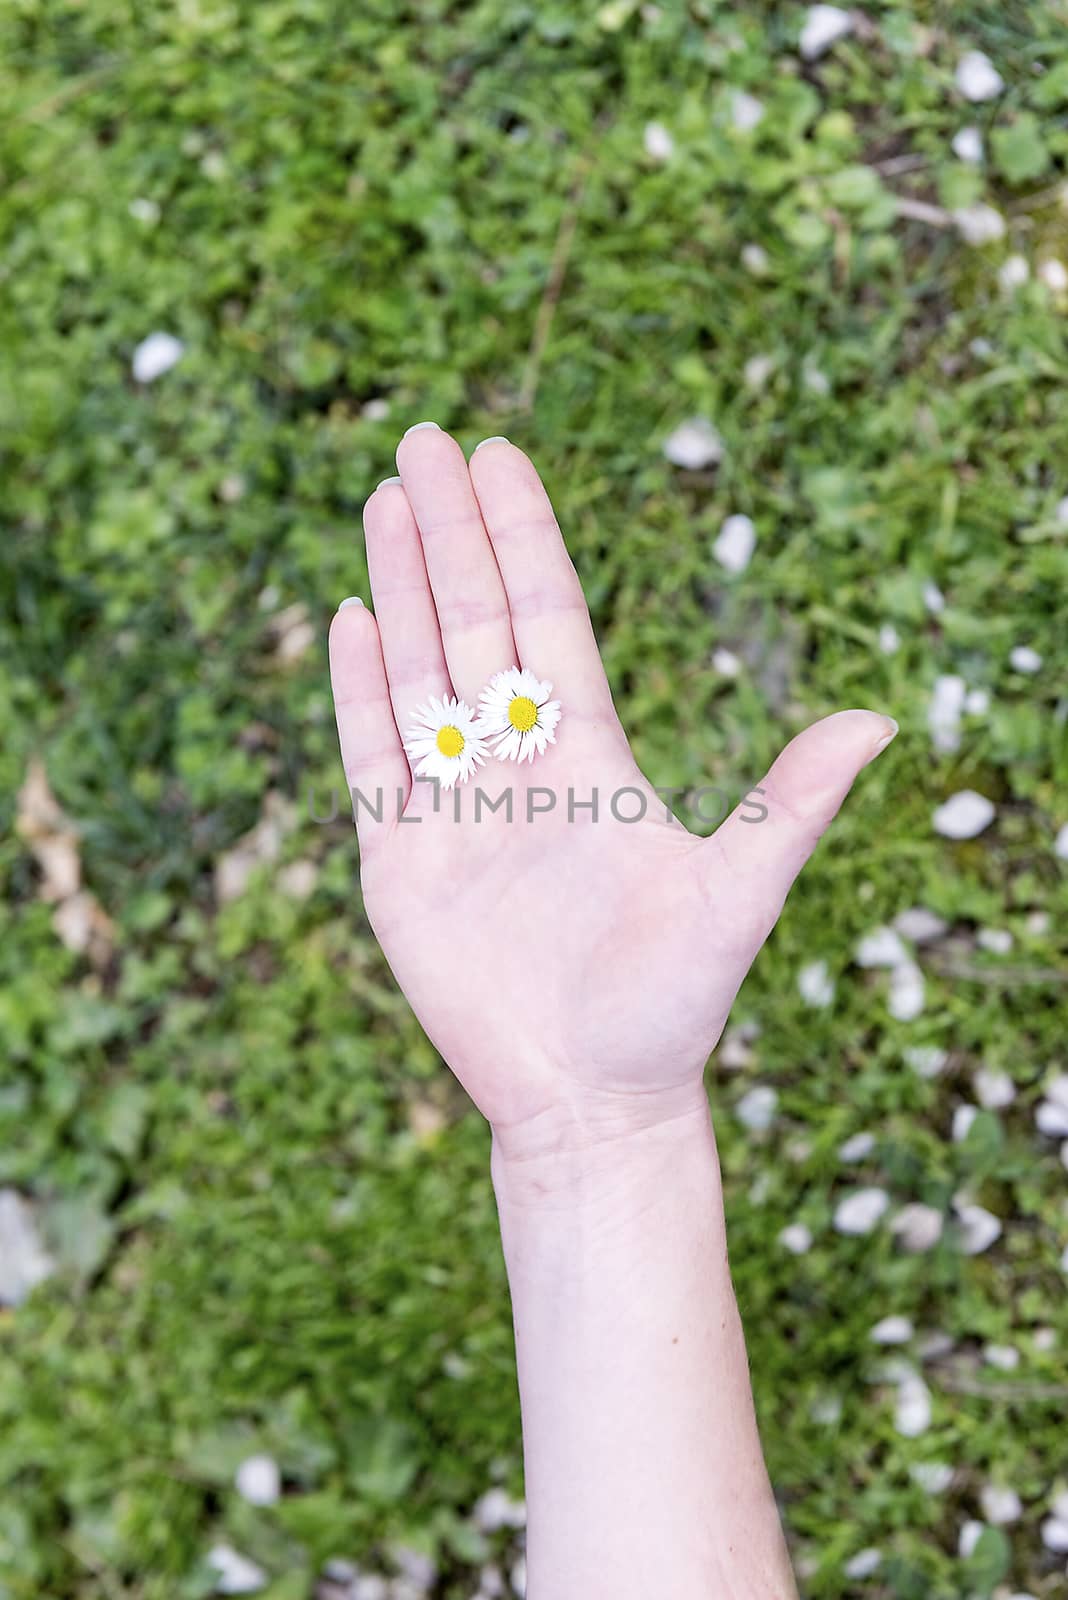 A female hand holding 2 daisies among fingers by marcorubino